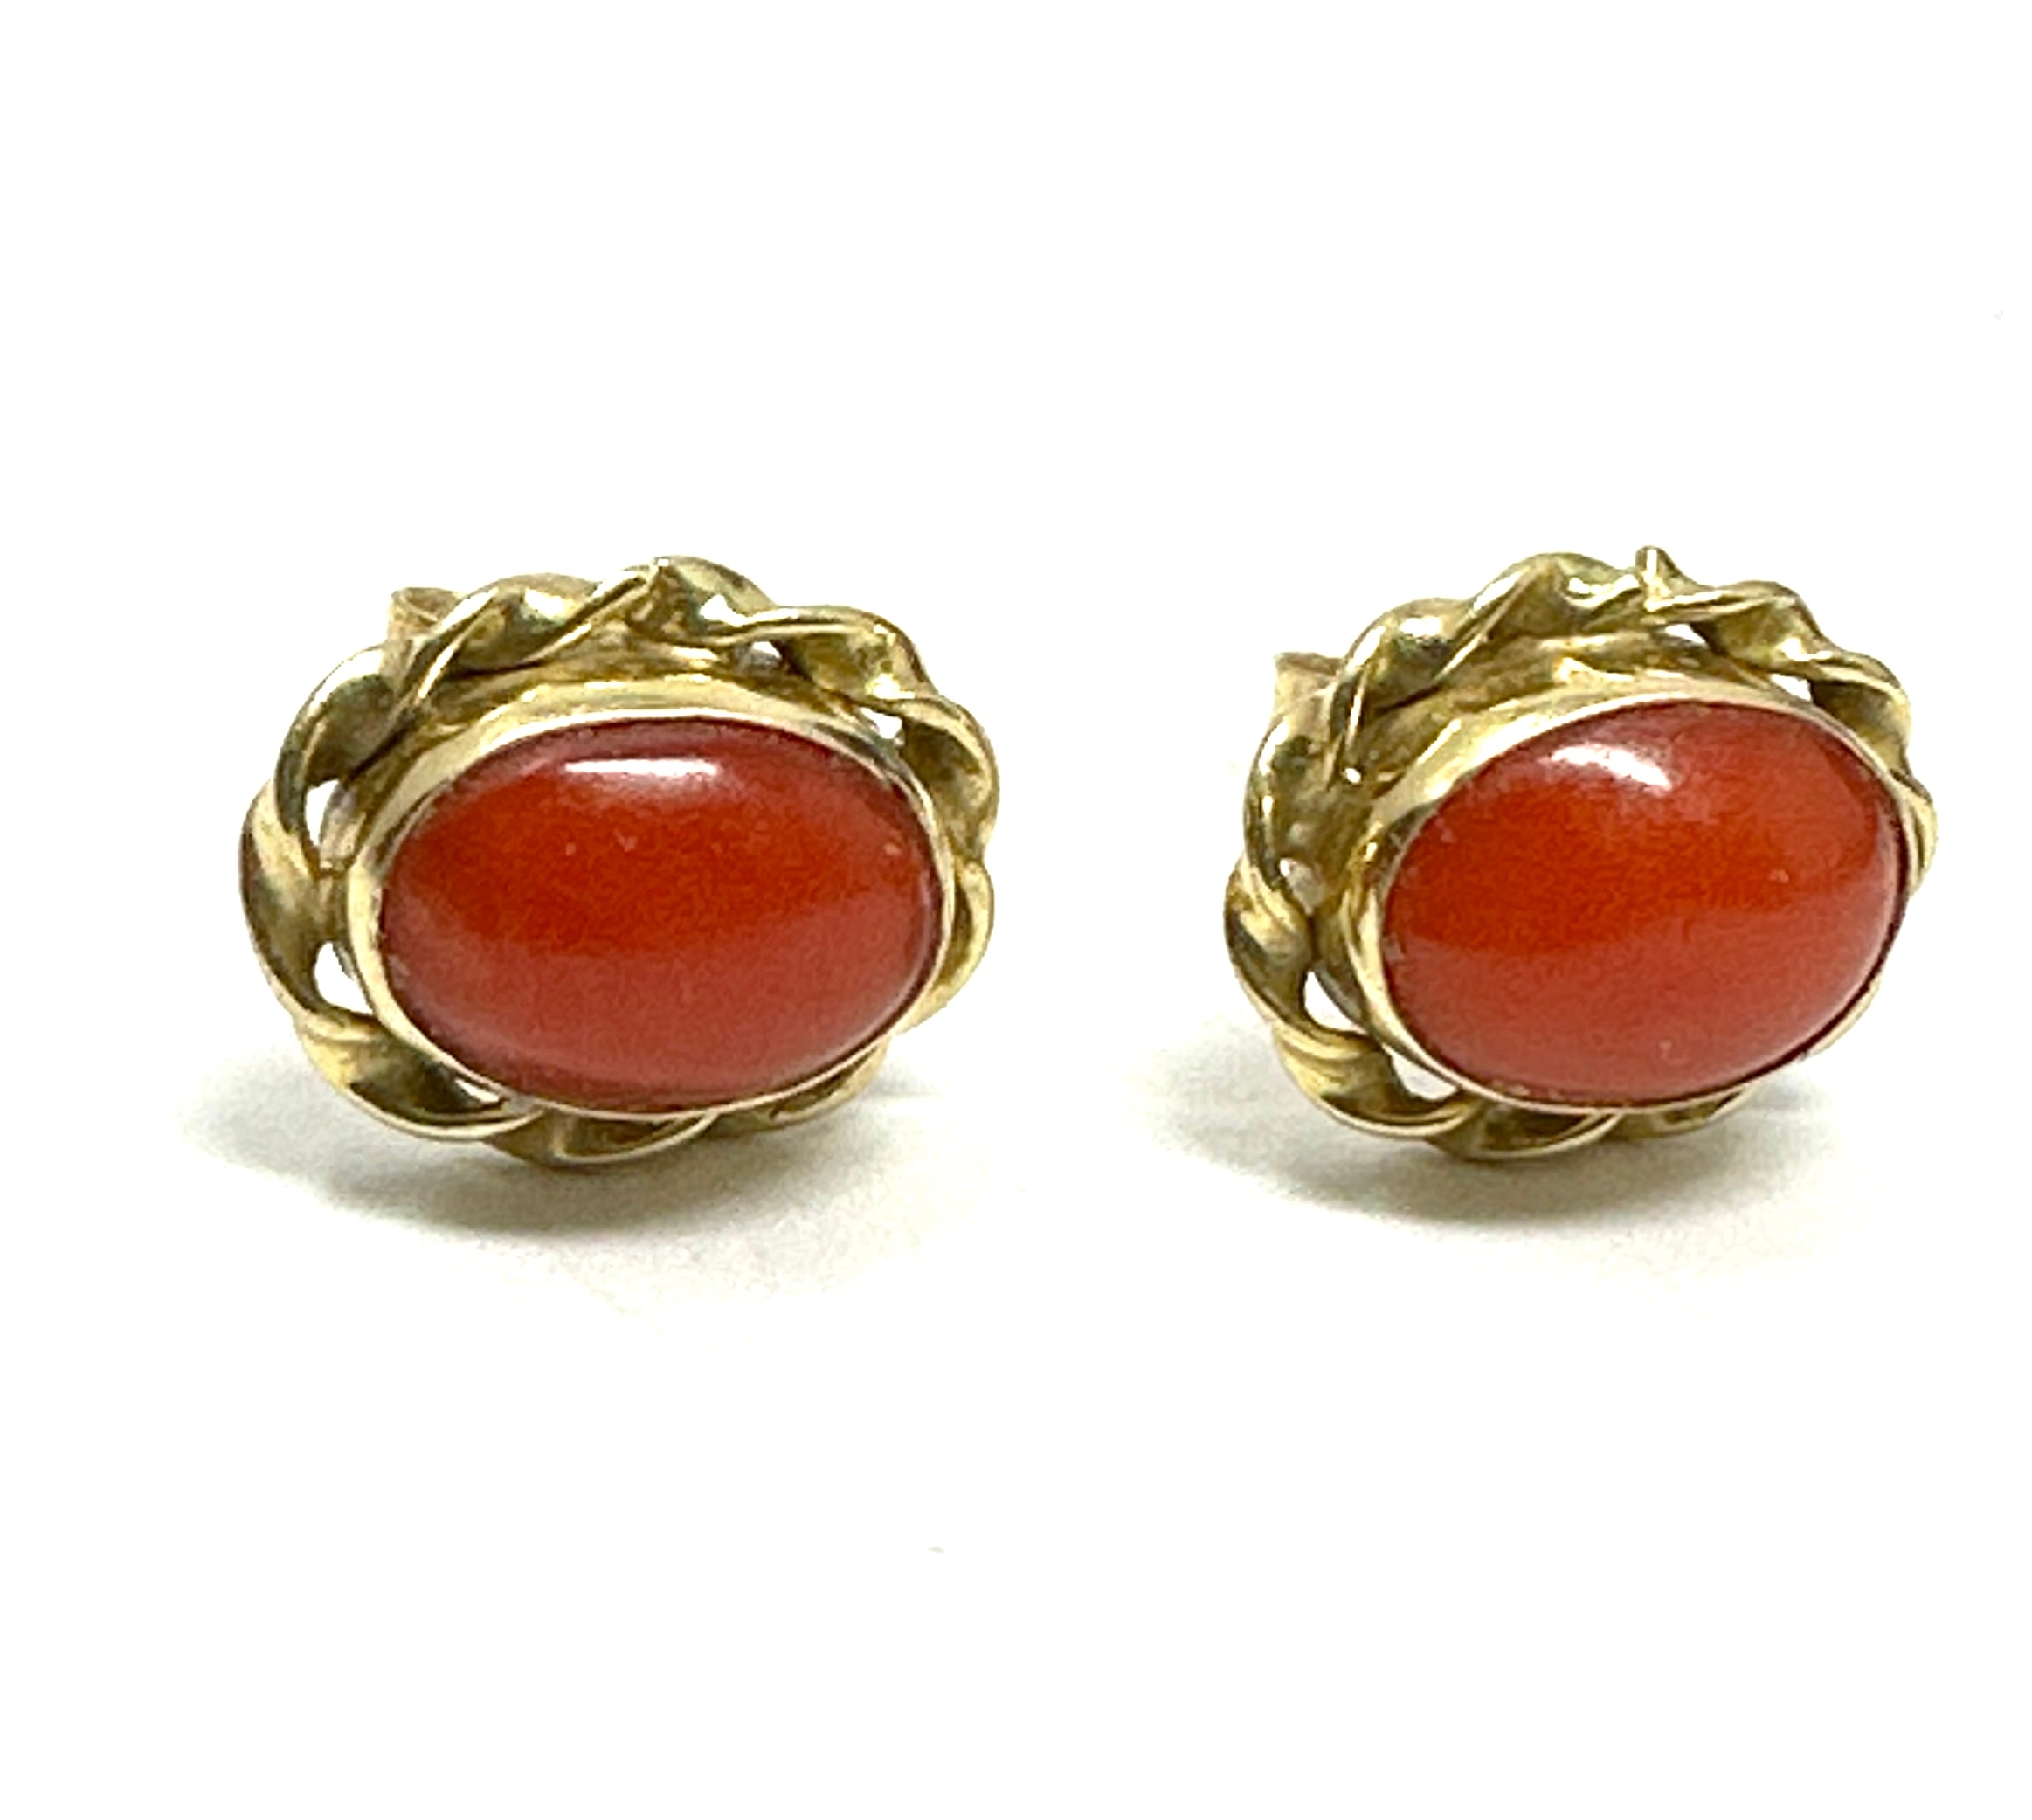 18ct gold coral earrings weight 2.5g